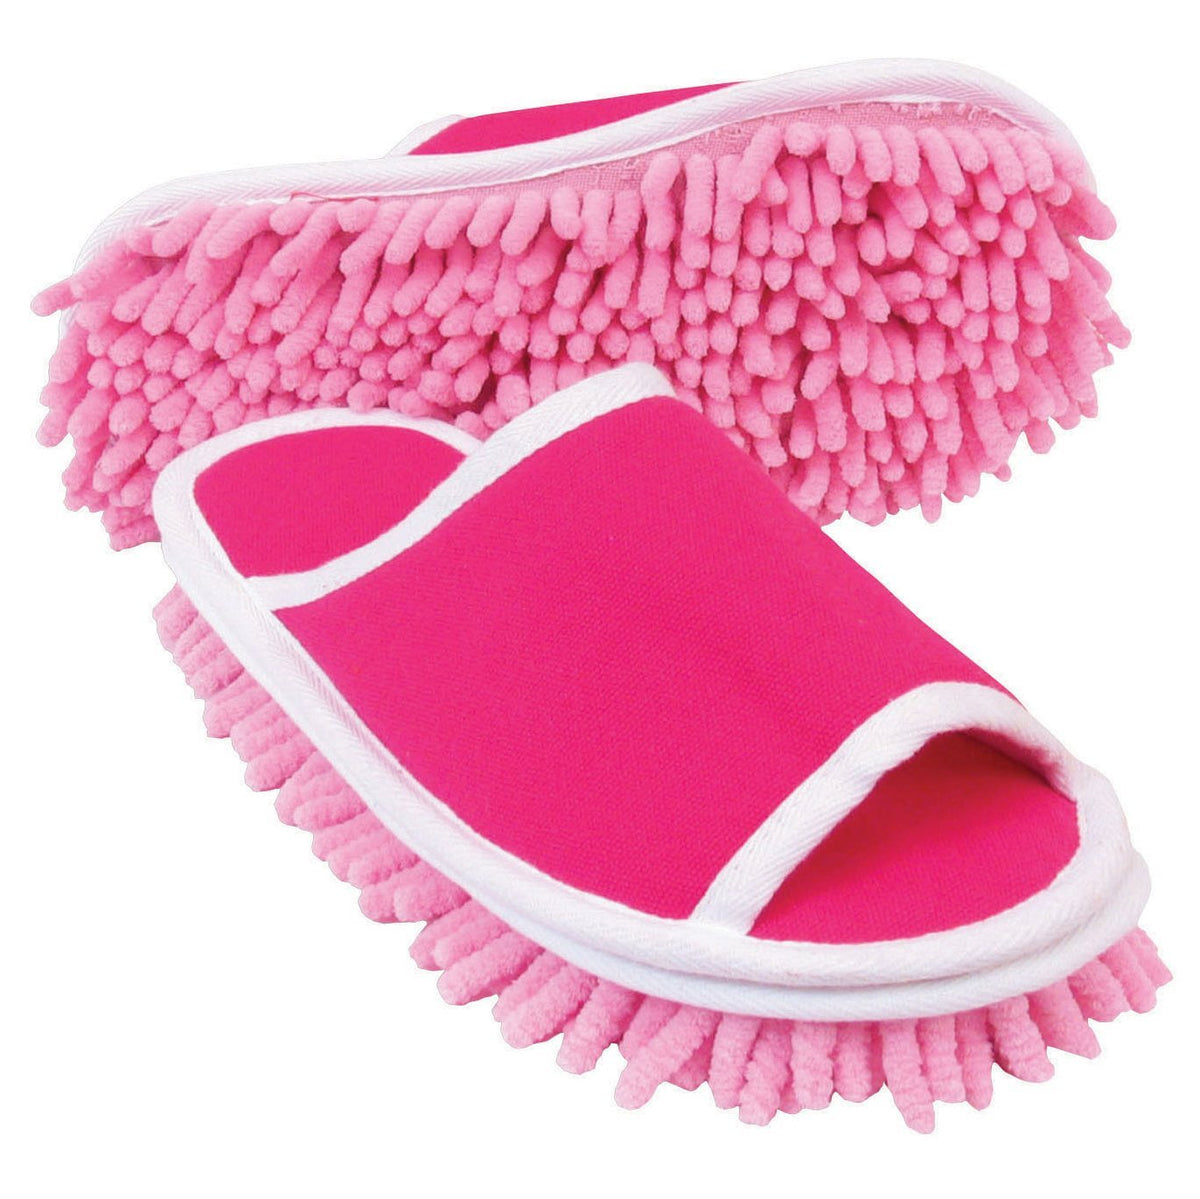 Buy slipper genie microfiber cleaning slippers - Online store for cleaning tools, electrostatic sweepers & accessories in USA, on sale, low price, discount deals, coupon code